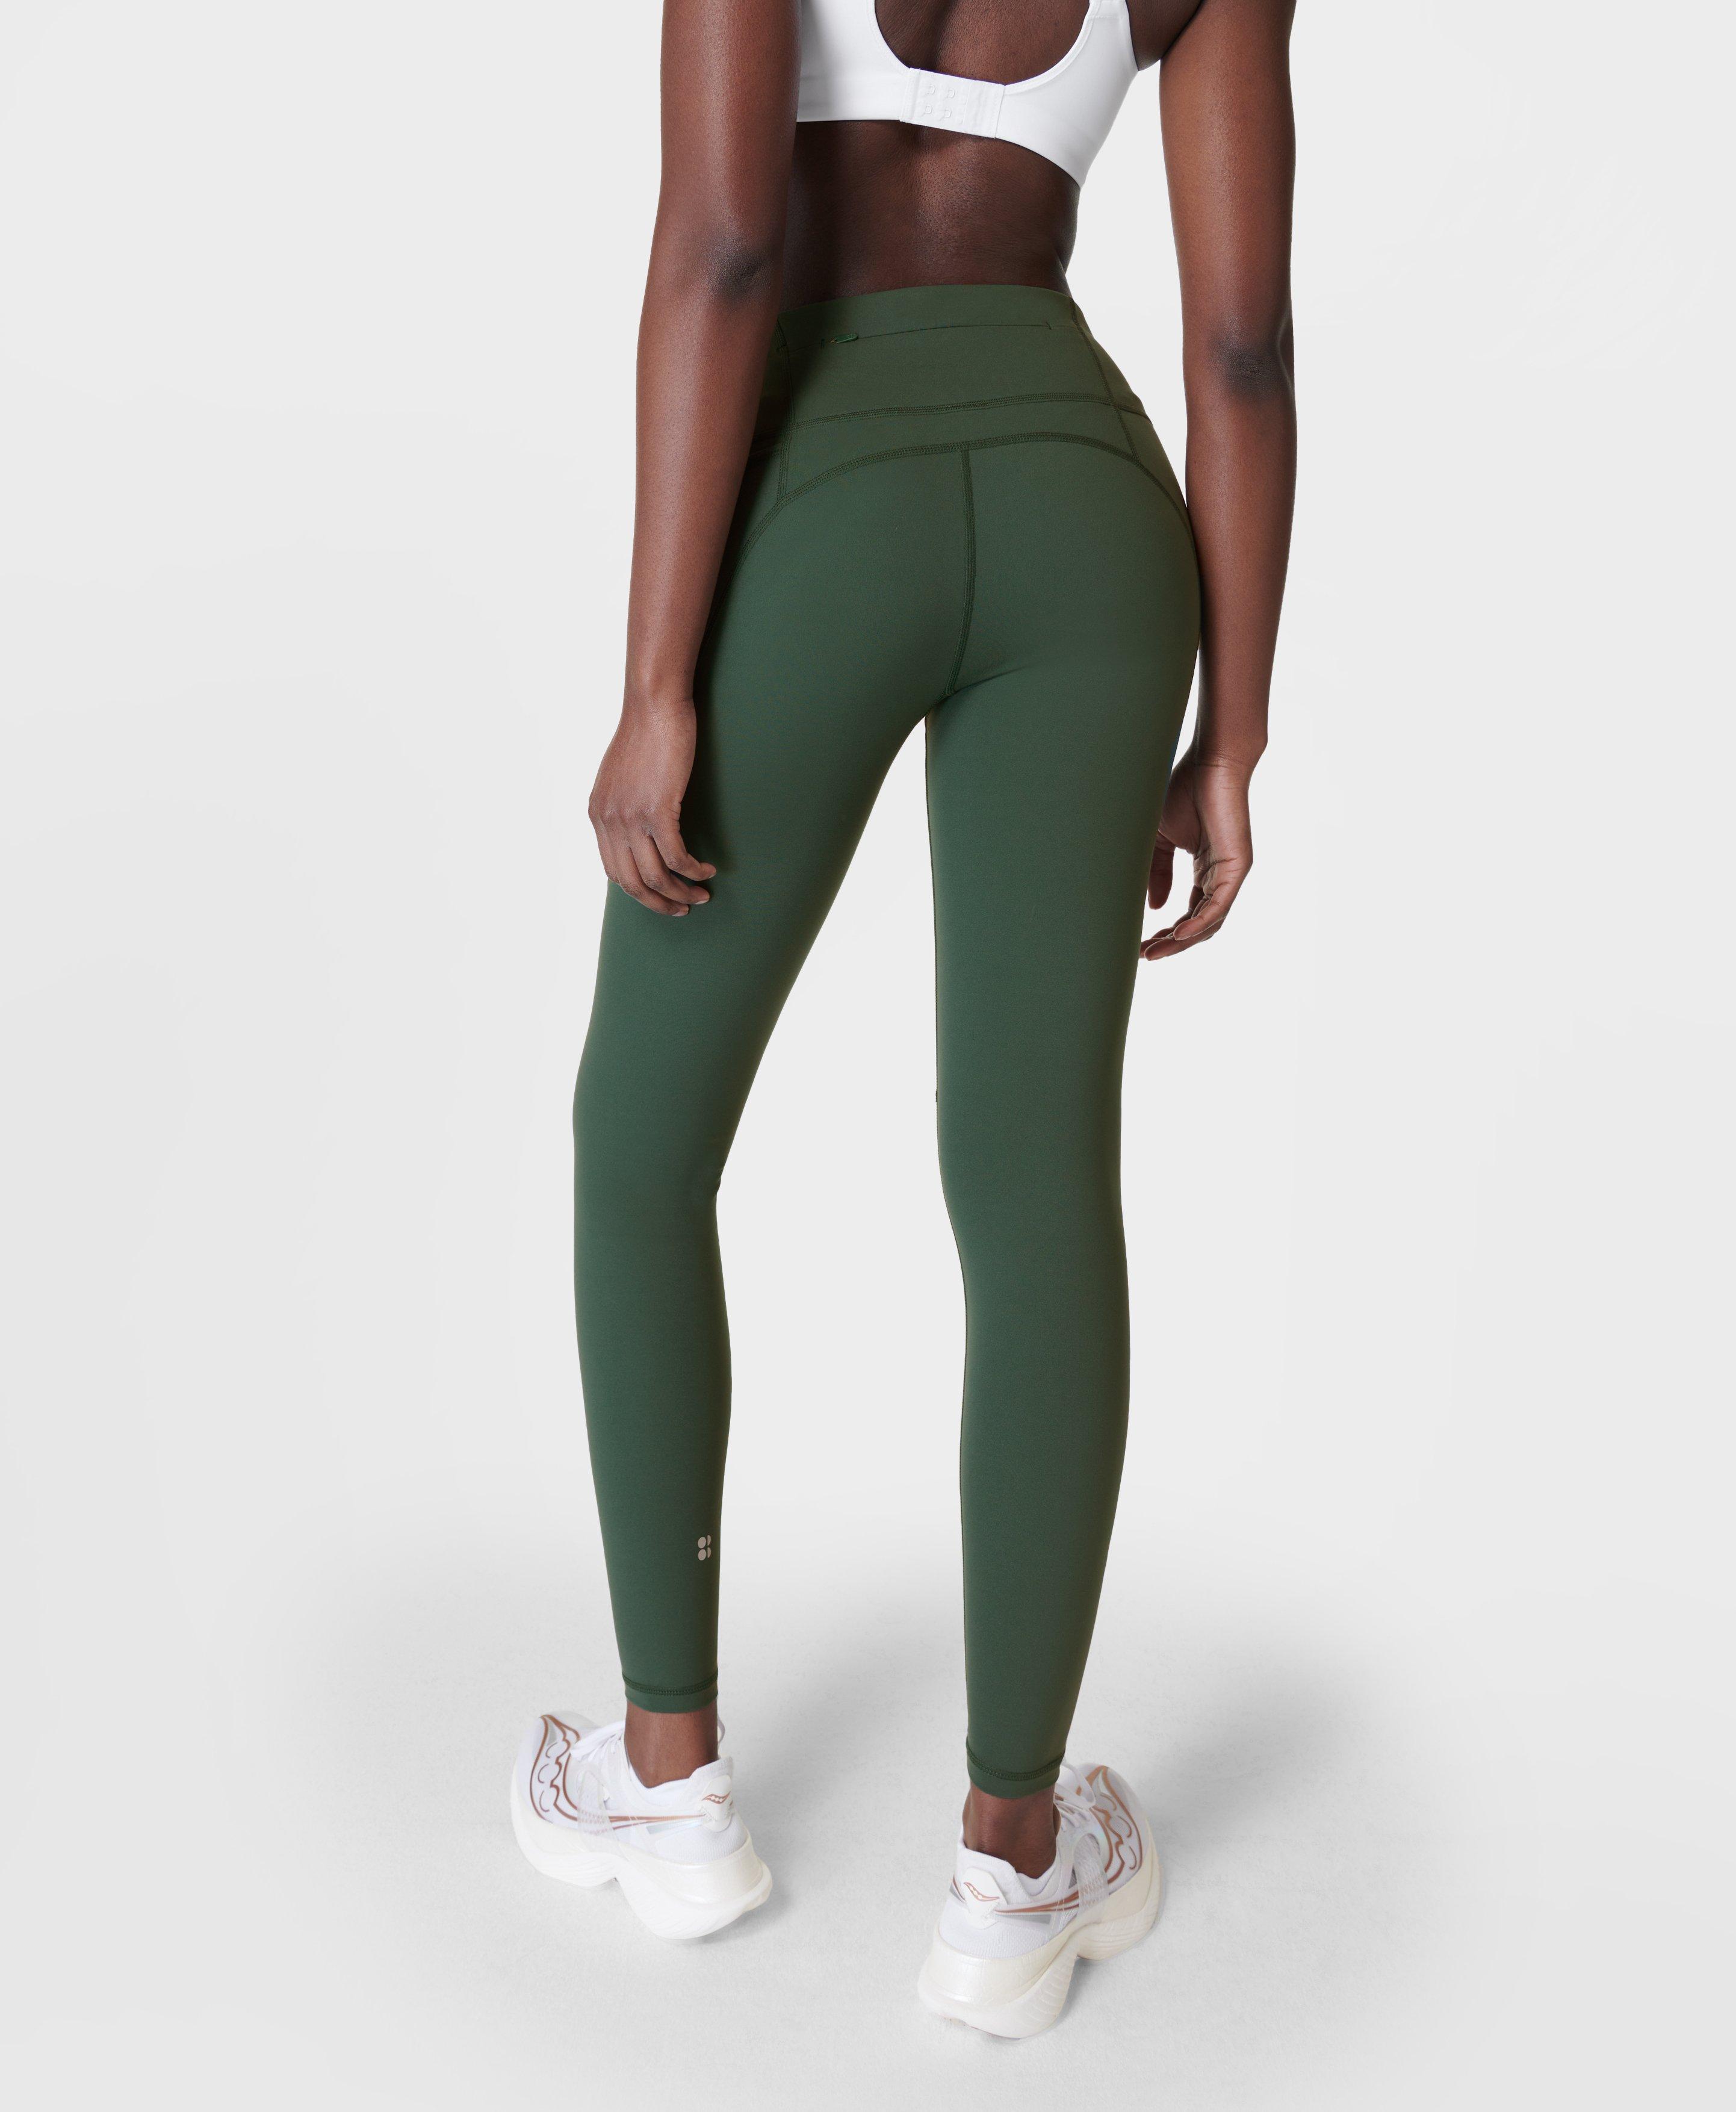 Sweaty Betty High Waisted Power Leggings Retro Green Size Small, Women's  Fashion, Activewear on Carousell